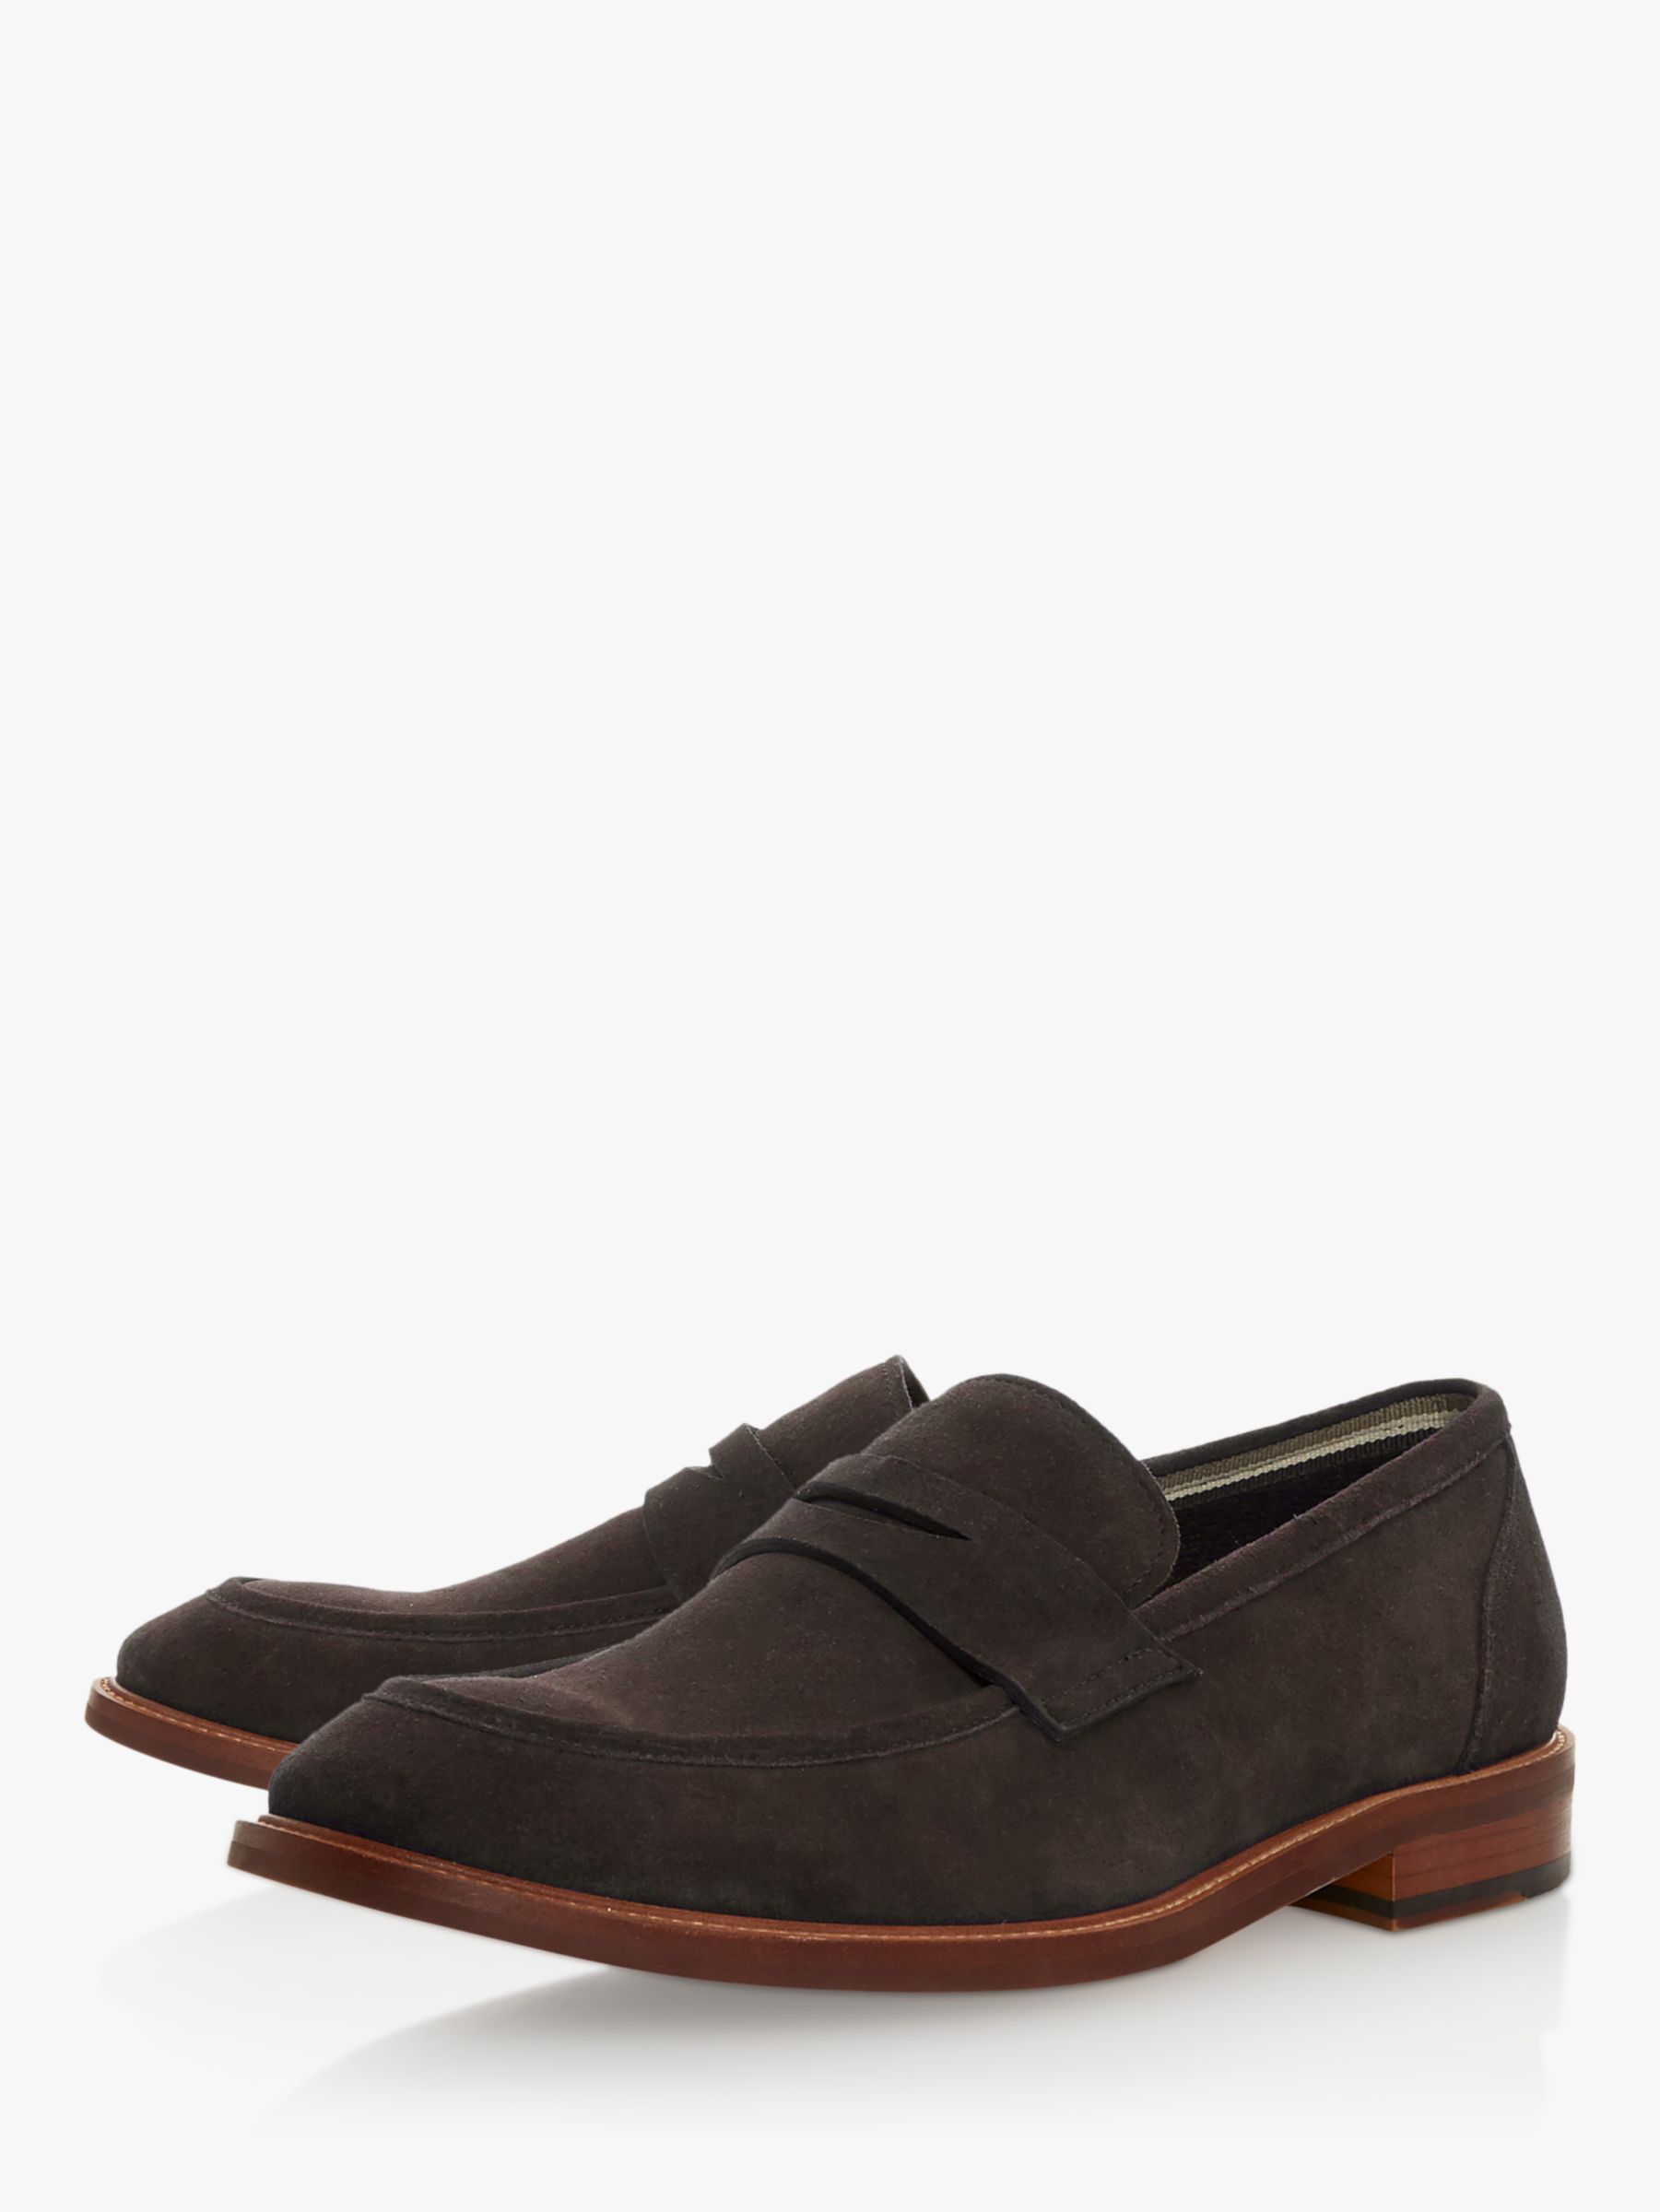 Dune Basell Suede Penny Loafers at John Lewis & Partners